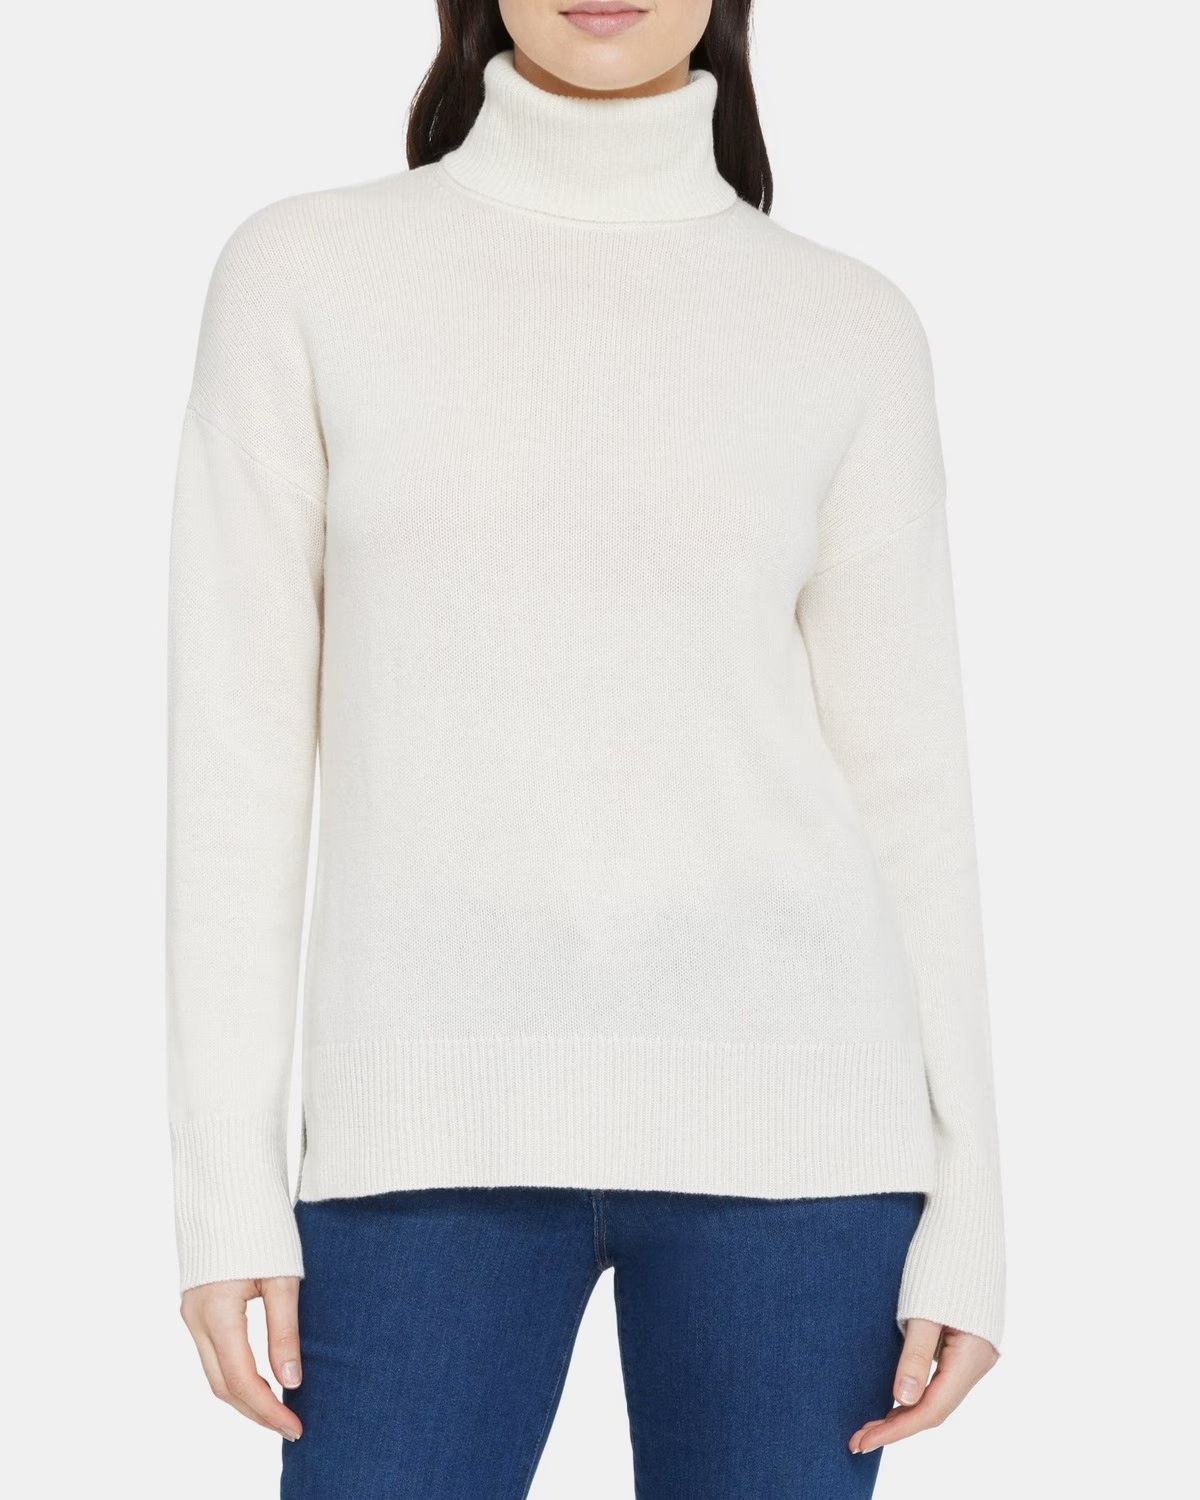 Slouchy Turtleneck Sweater in Cashmere | Theory Outlet